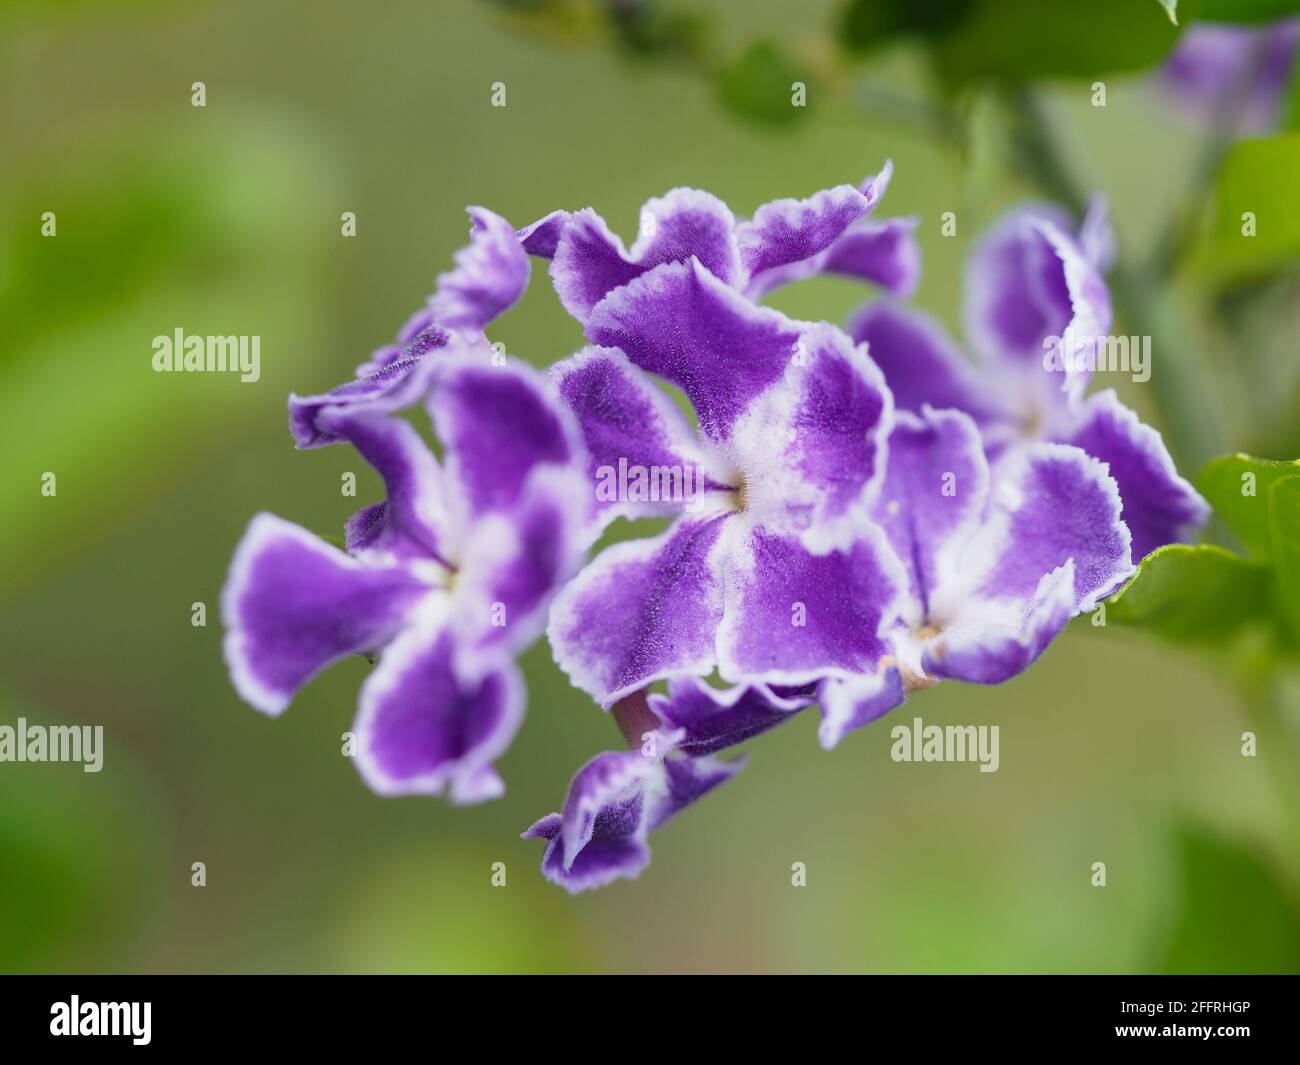 Macro photo of a stem of gorgeous rich purple with white trim Geisha Girl Flowers, Durantas repens, in the garden, blurred olive green background Stock Photo